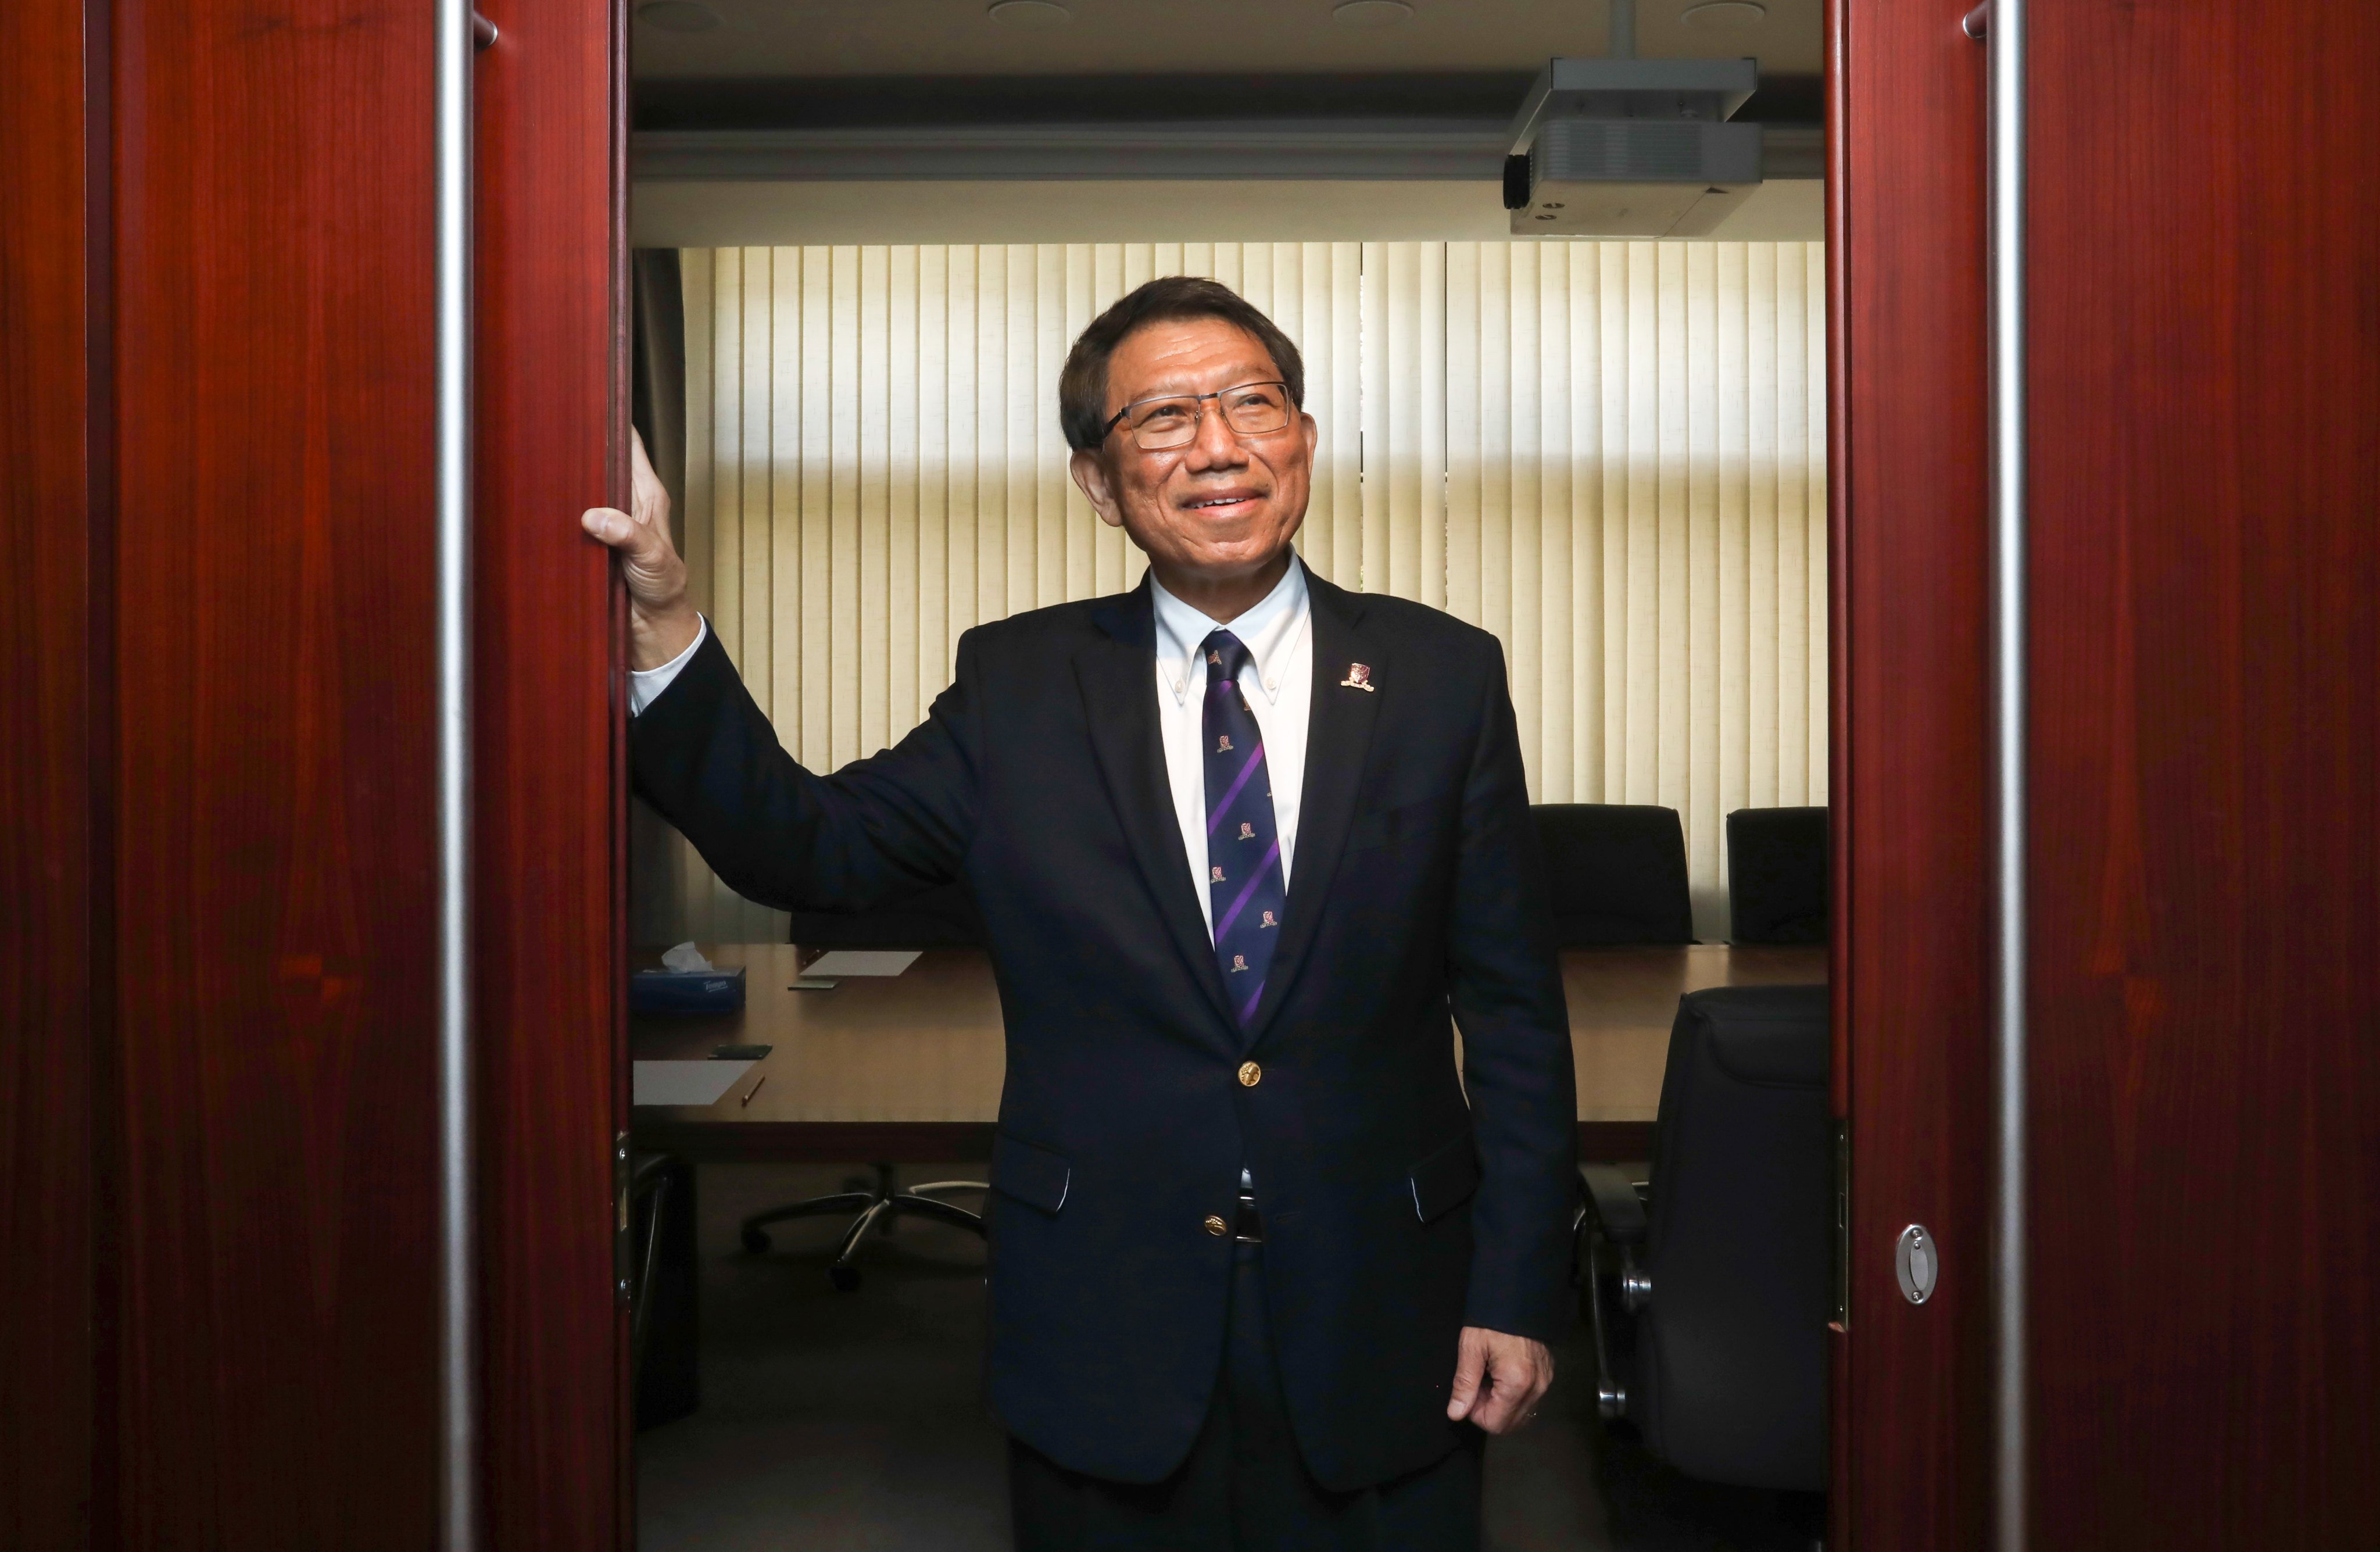 The Chinese University of Hong Kong’s outgoing president, Rocky Tuan. The institution did not say when Tuan suffered his injury or the length of his expected absence. Photo: Jonathan Wong